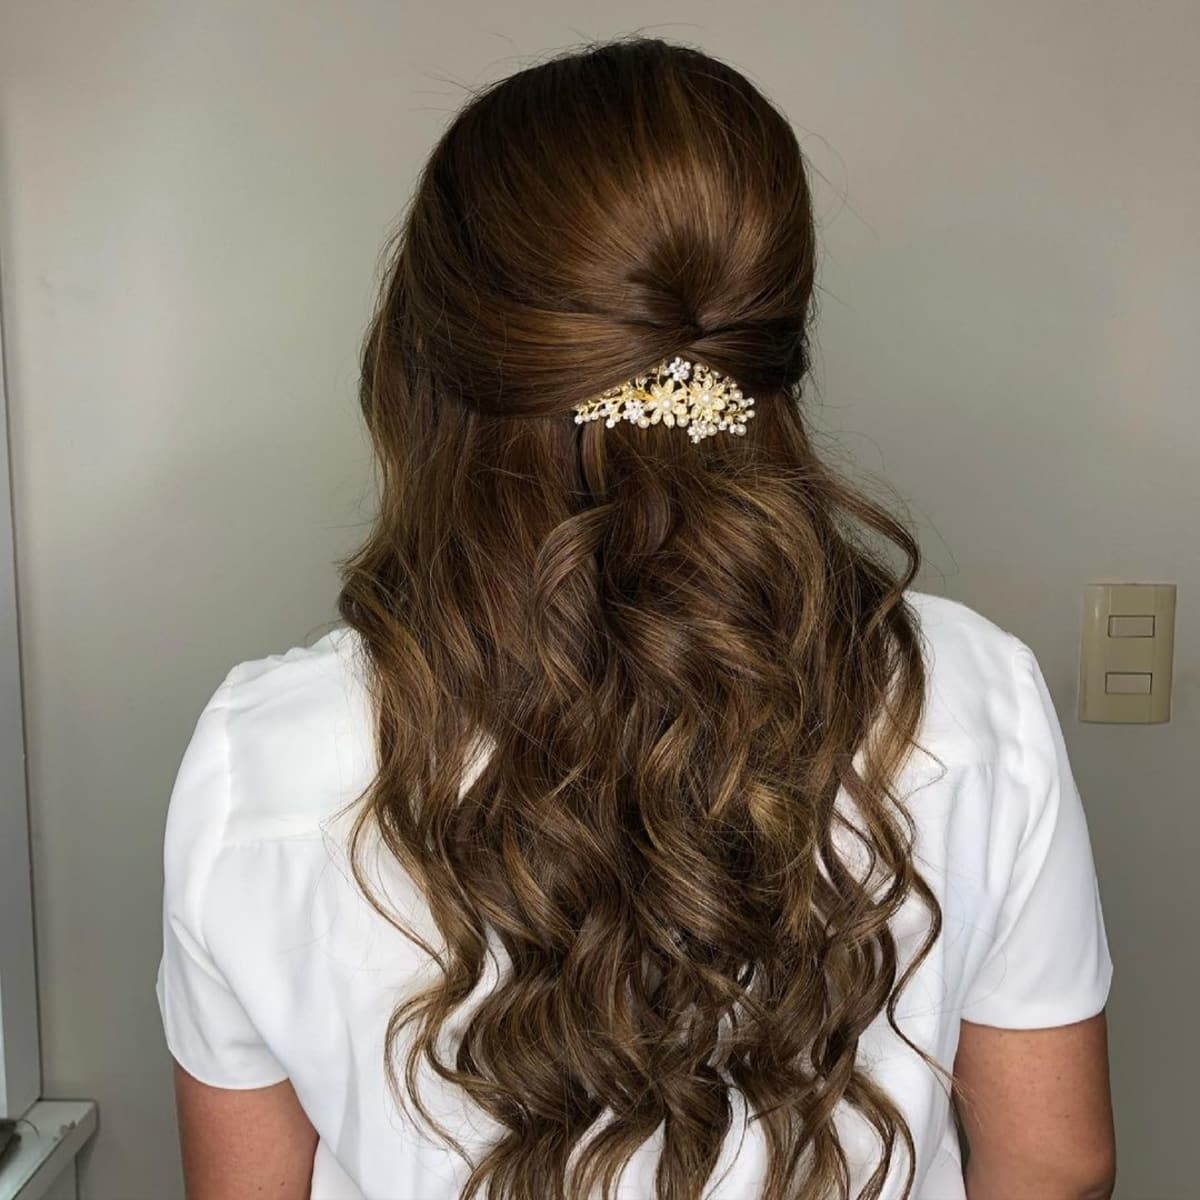 Wavy half up professional hairstyle